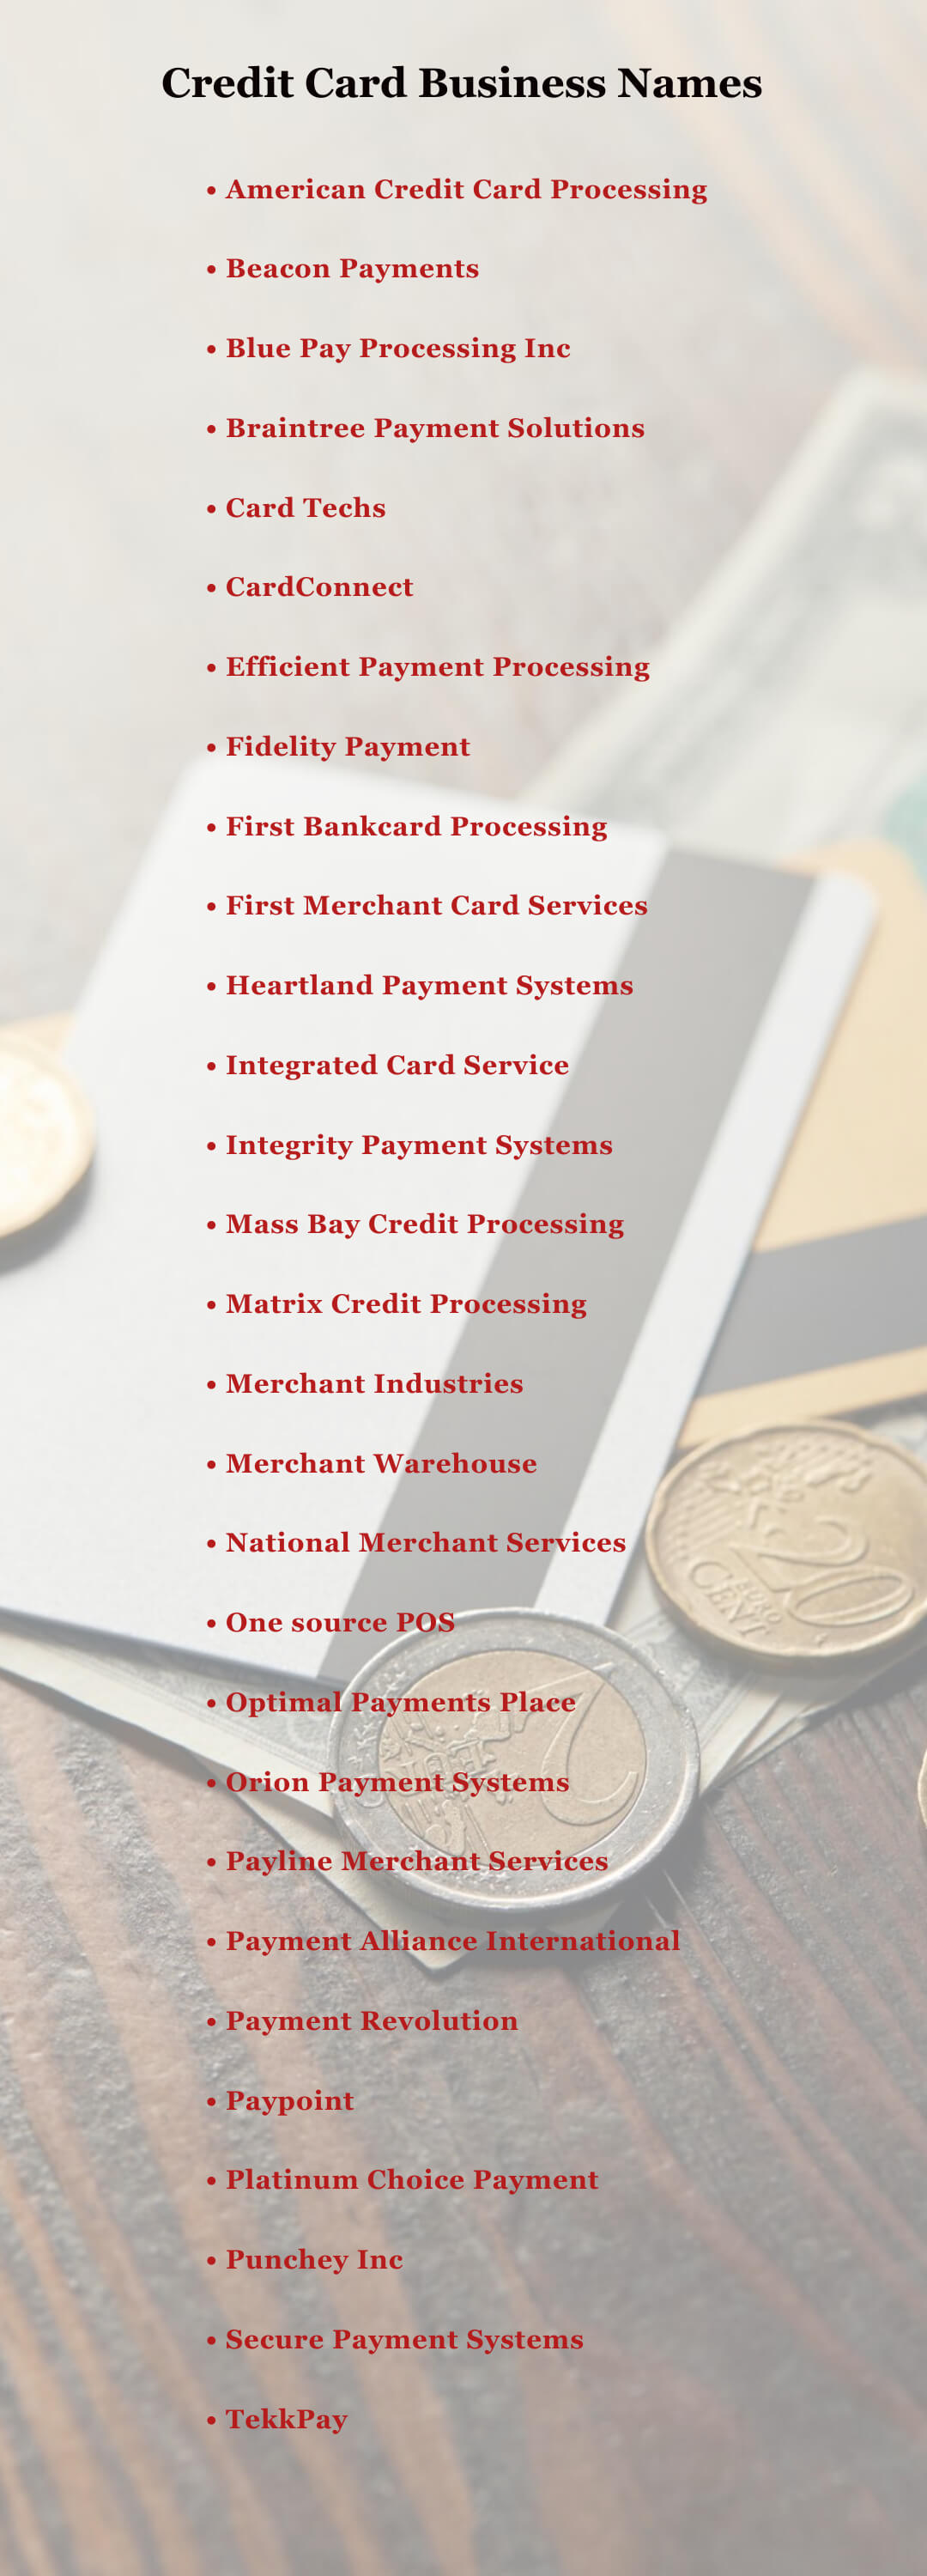 Credit Card Business Names